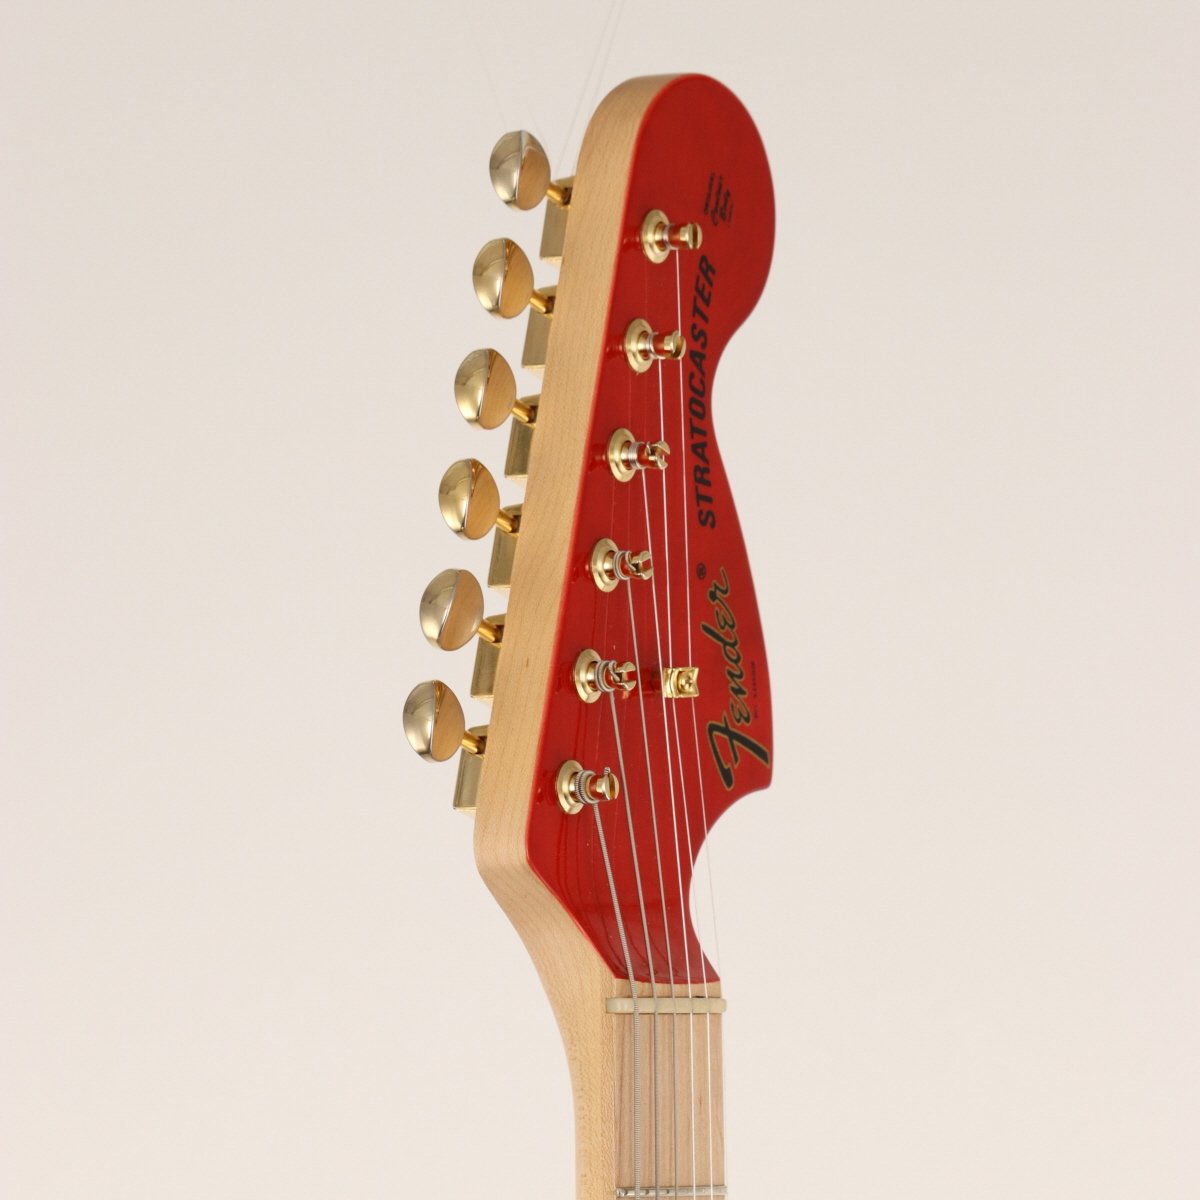 [SN JD17044263] USED Fender / MAMI Stratocaster RED MOD Red [11]